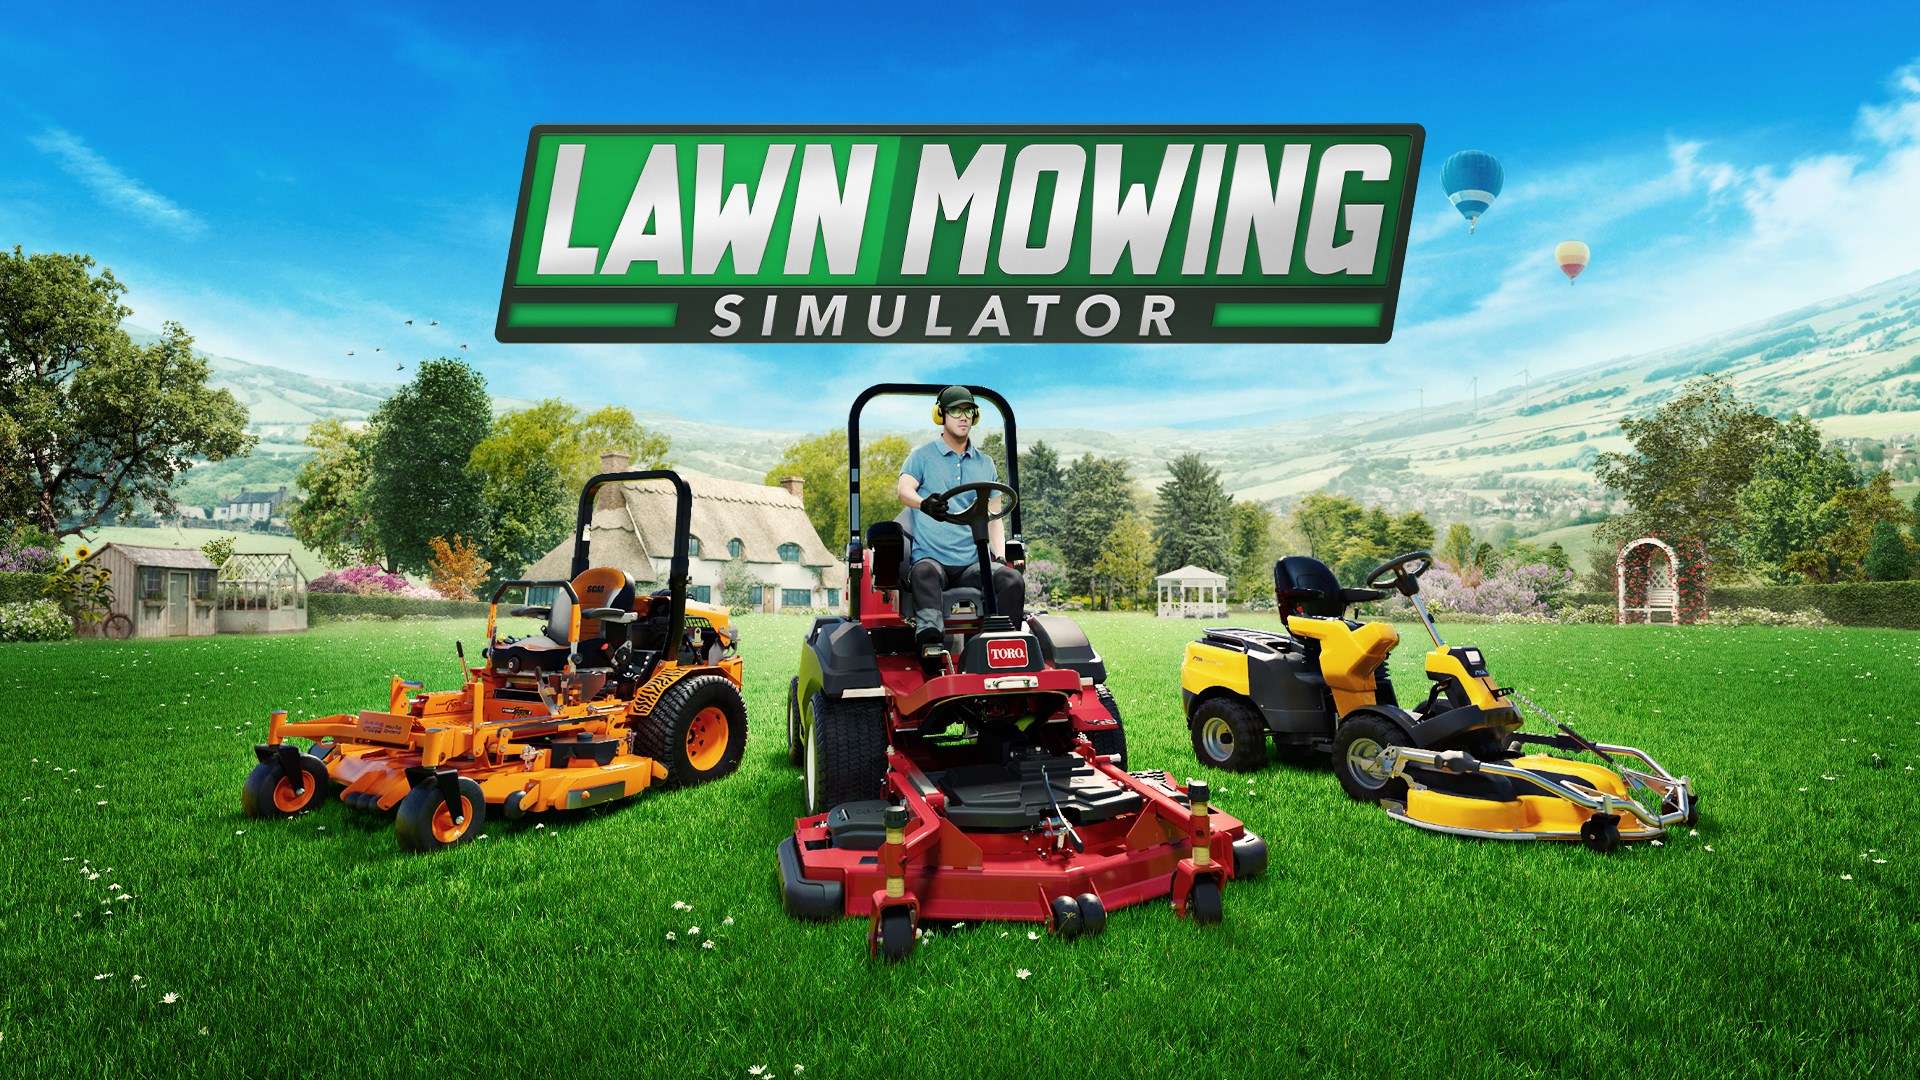 First Play Watch our deep cut of Lawn Mowing Simulator VGC